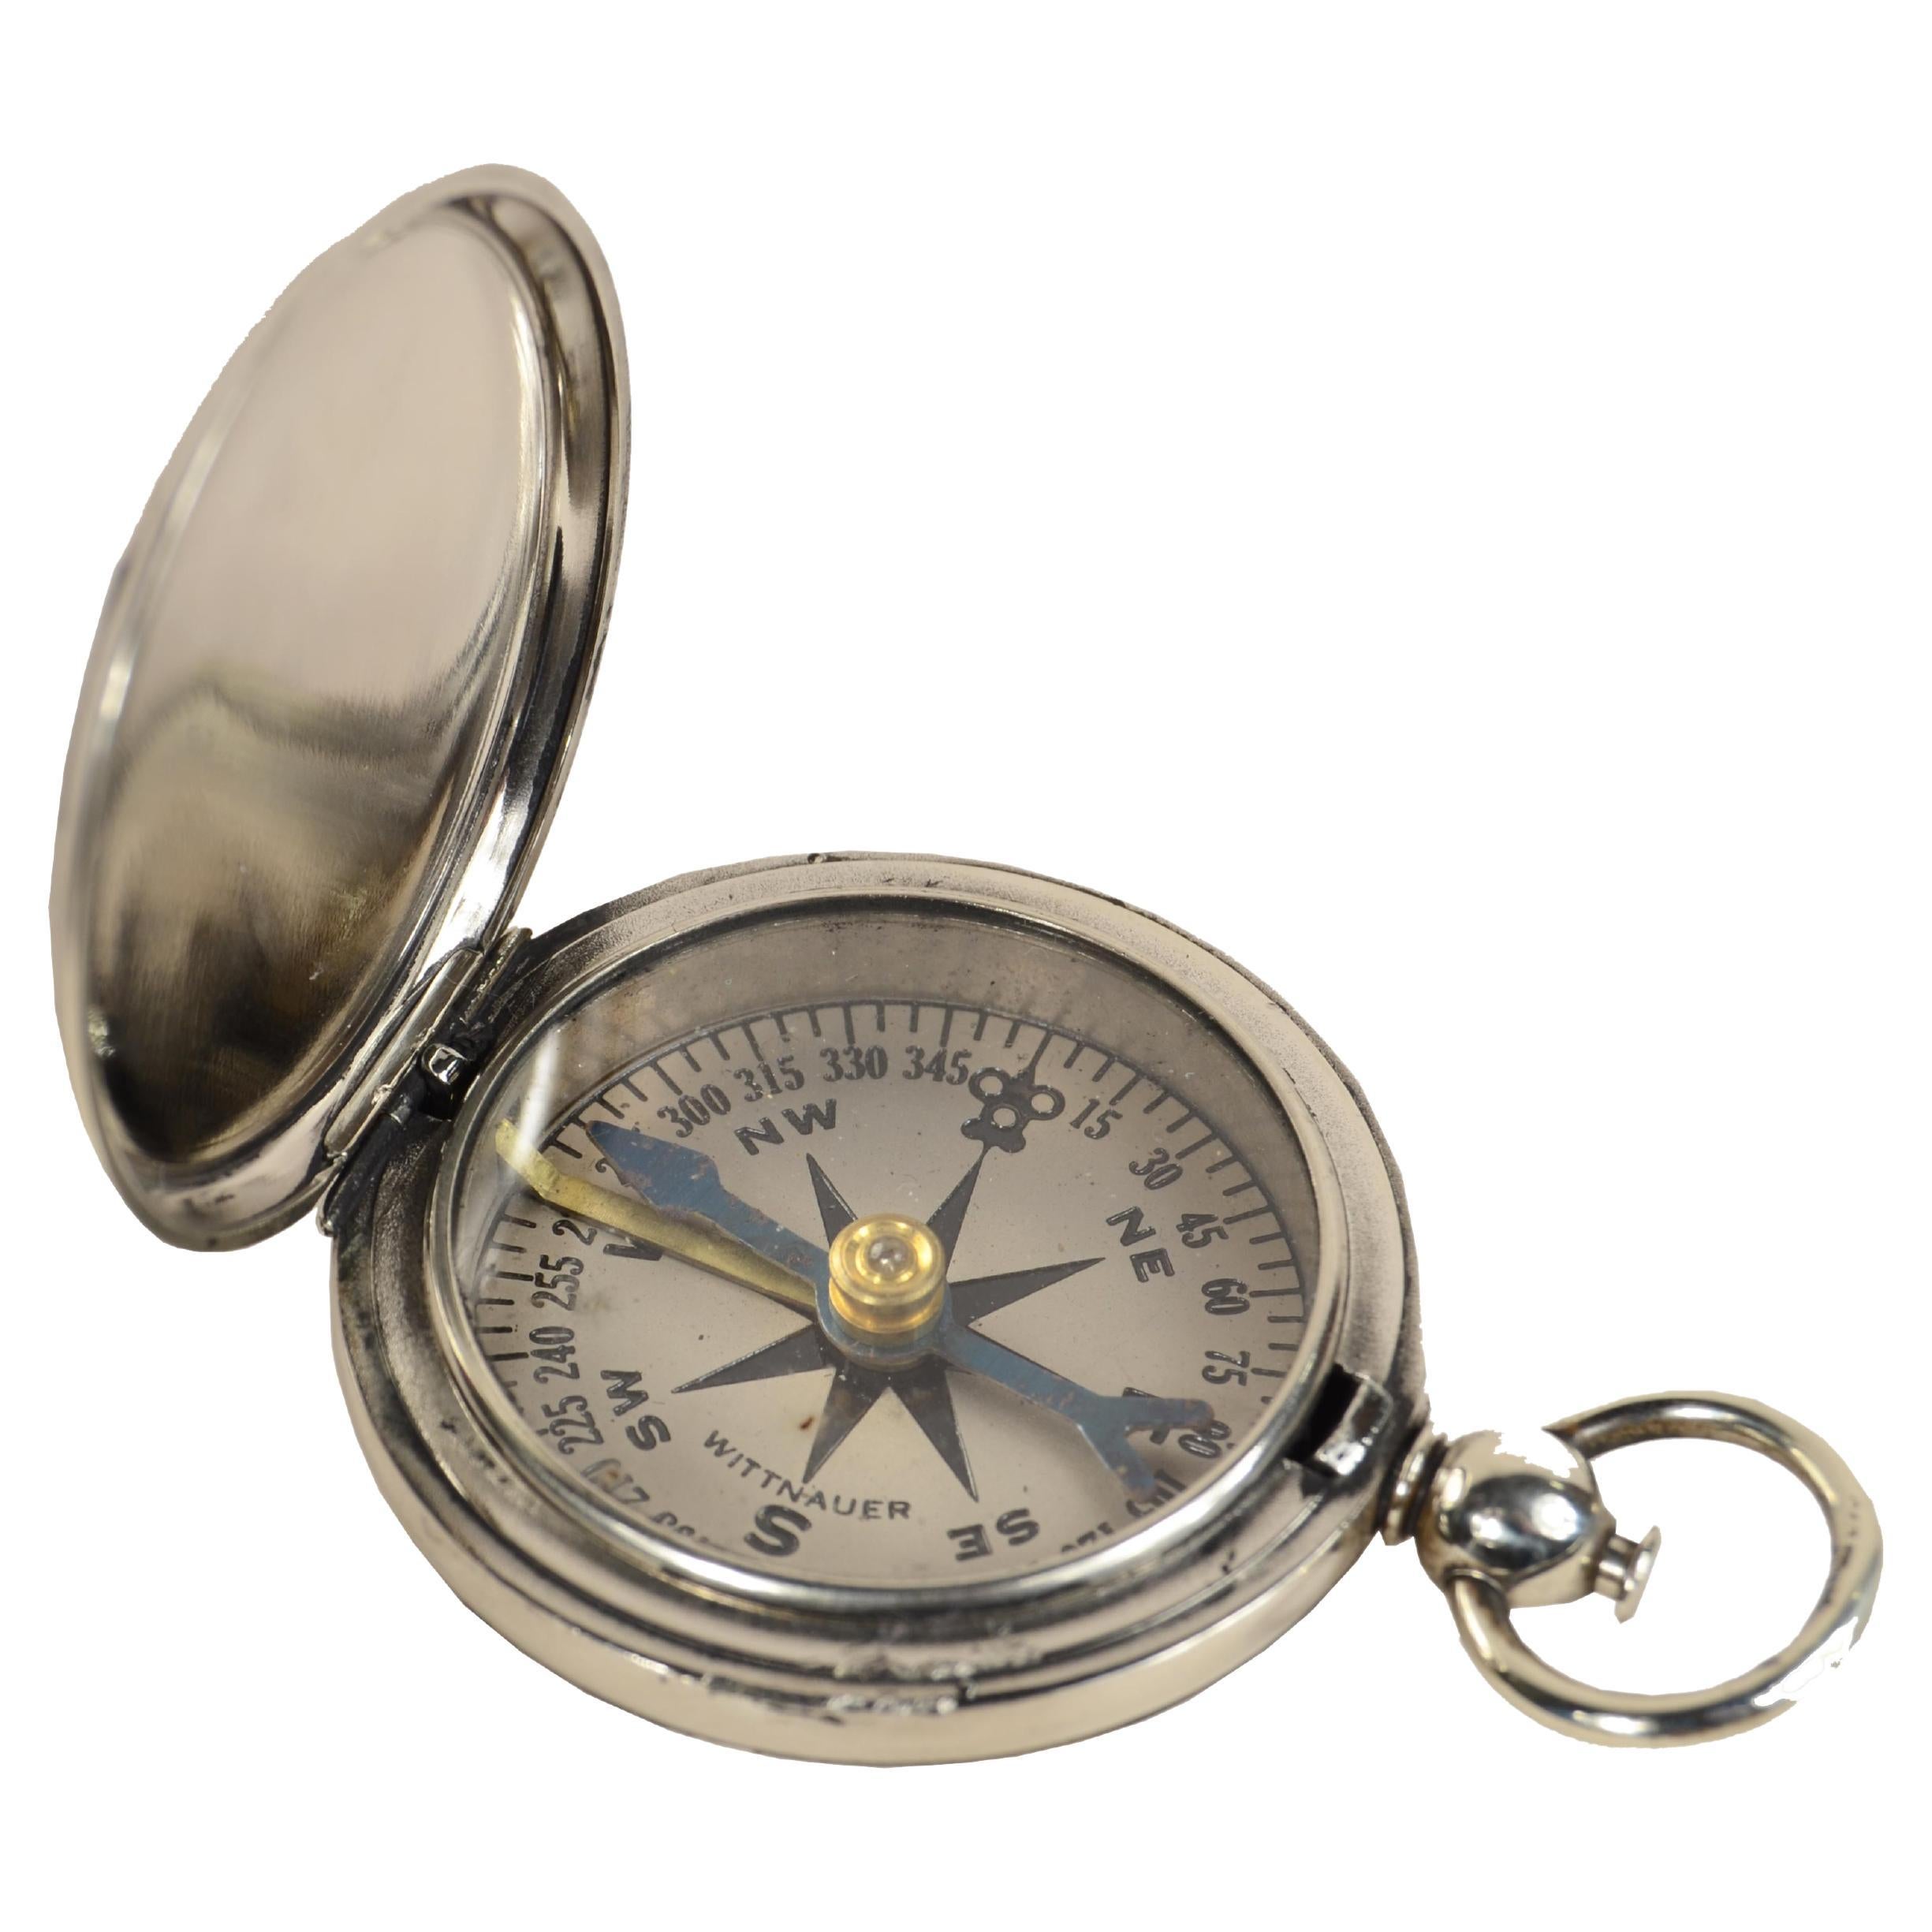 U.S. Army officer's pocket compass during WW1 signed WITTNAUER